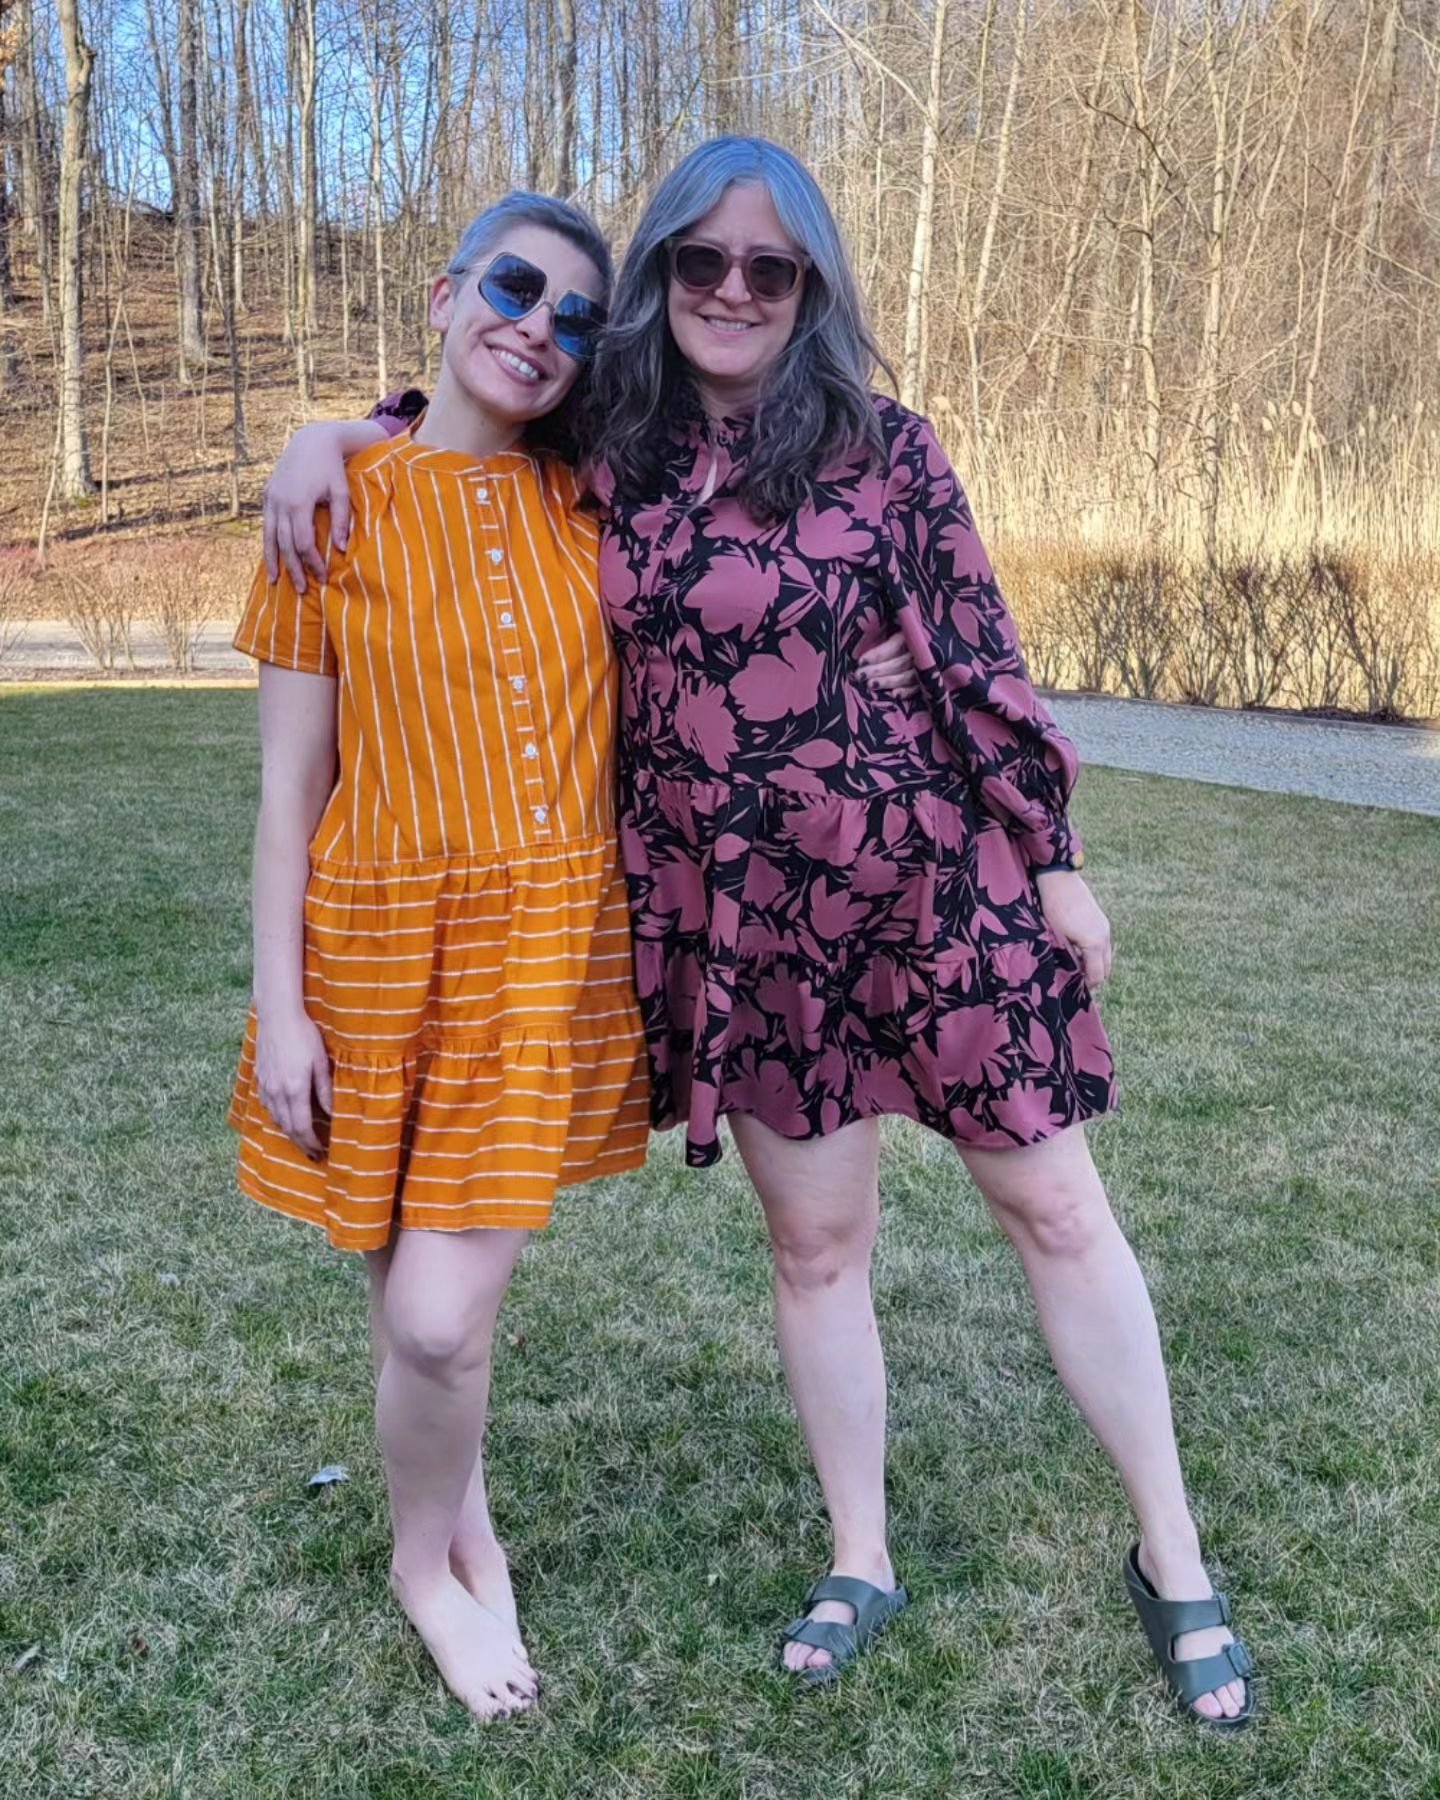 Me Made May day 12!

Ok this pic was not taken today but the second pic was! Little porch pic gets sidelined for these pics from our sewing retreat back in March when Jen and I made her new Poppy Dresses, coming soon! #grainlinepoppy #grainlinestudio